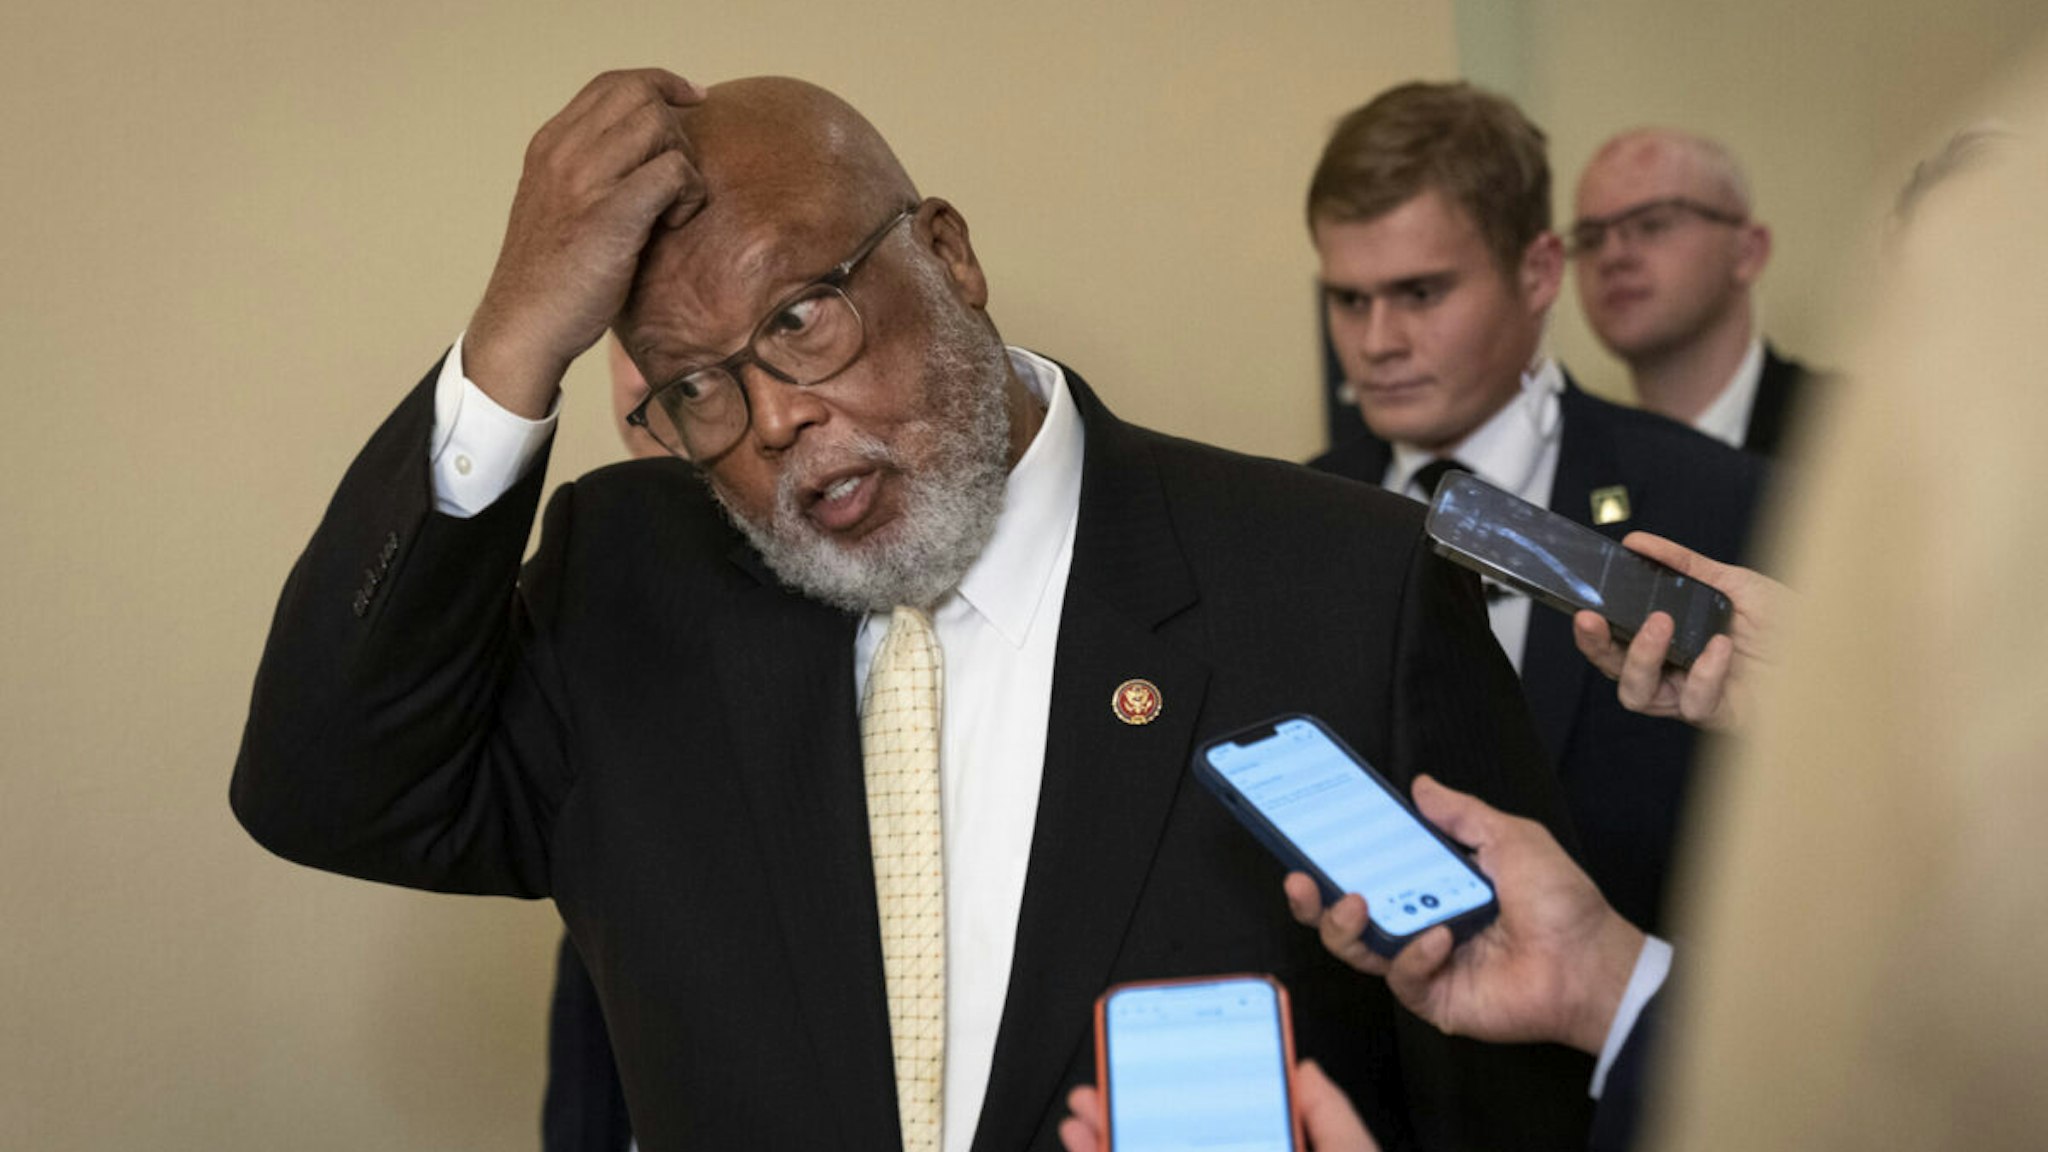 Committee Chairman Rep. Bennie Thompson (D-MS) speaks briefly to reporters as he arrives for the final meeting of the House Select Committee to Investigate the January 6 Attack on the U.S. Capitol in the Canon House Office Building on Capitol Hill on December 19, 2022 in Washington, DC.